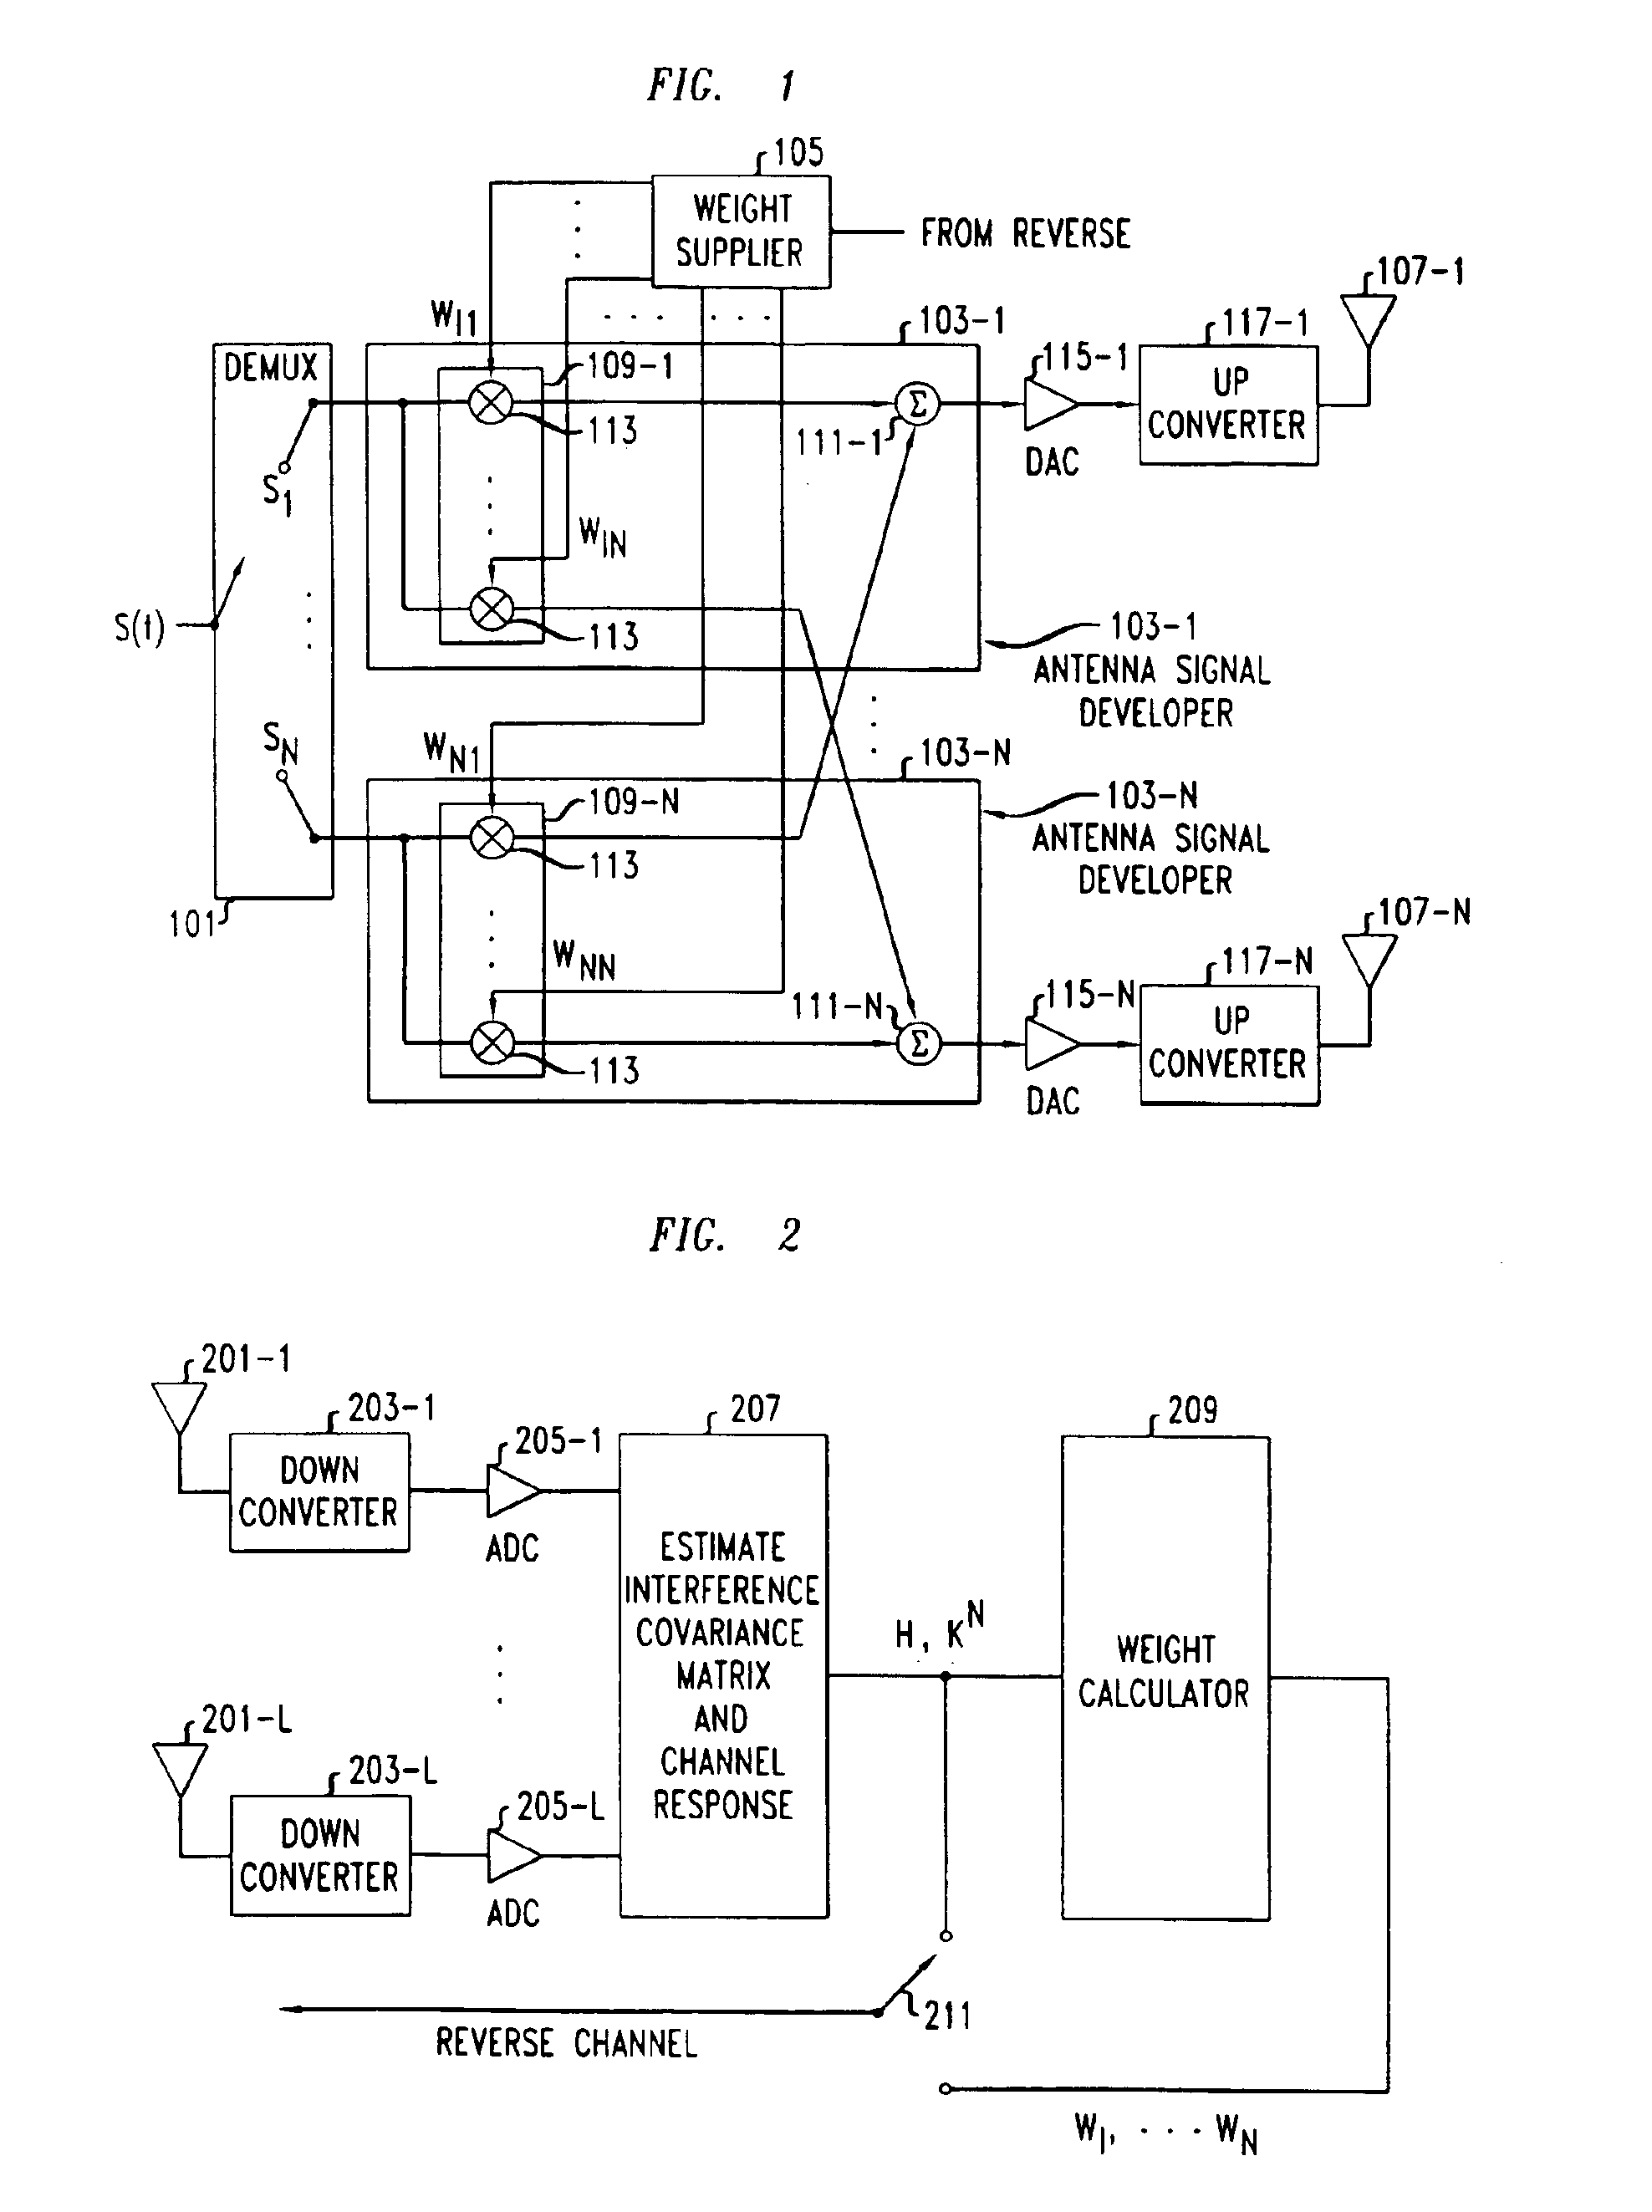 Space-time processing for multiple-input, multiple-output, wireless systems